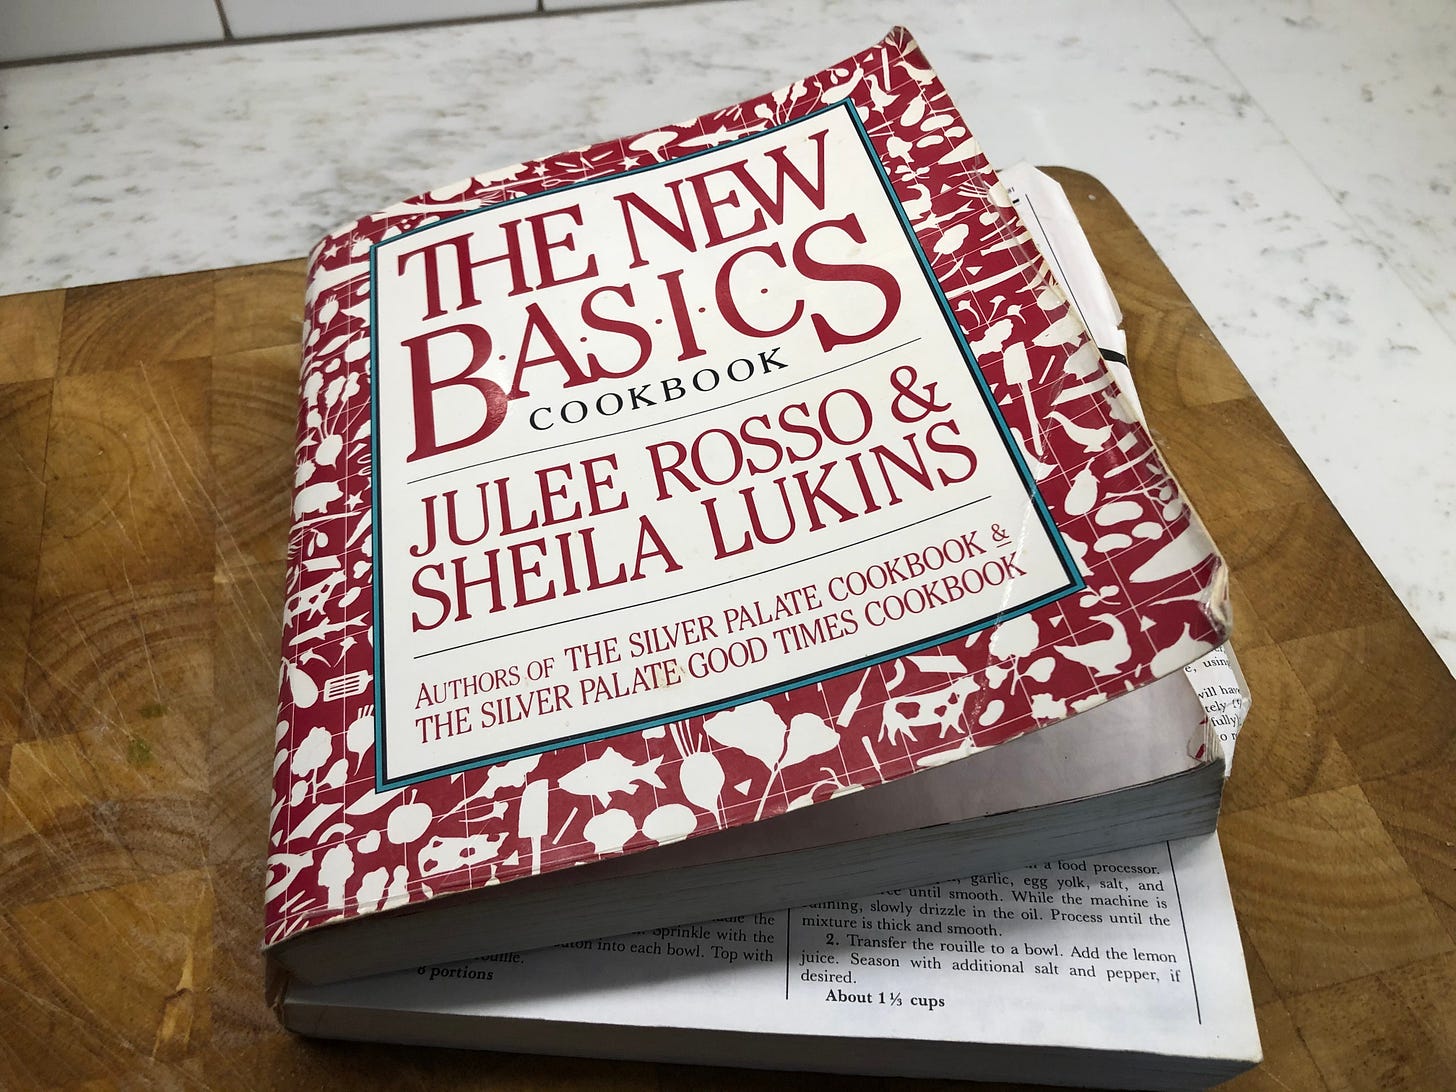 My battered copy of "The New Basics Cookbook"